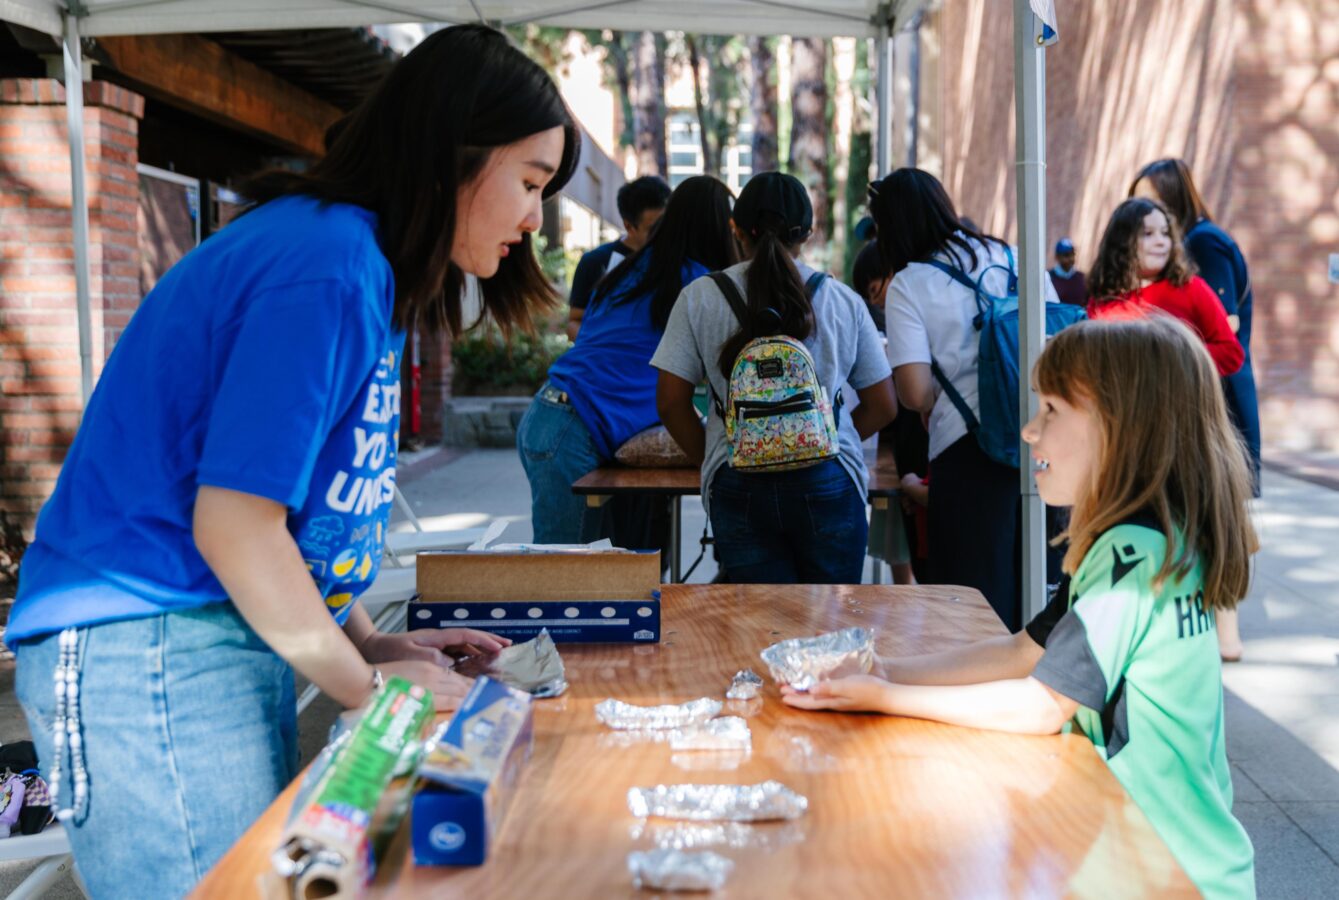 A UCLA student volunteer interacts with a young K12 student at one of the many science booths during the annual exploring your universe event on campus